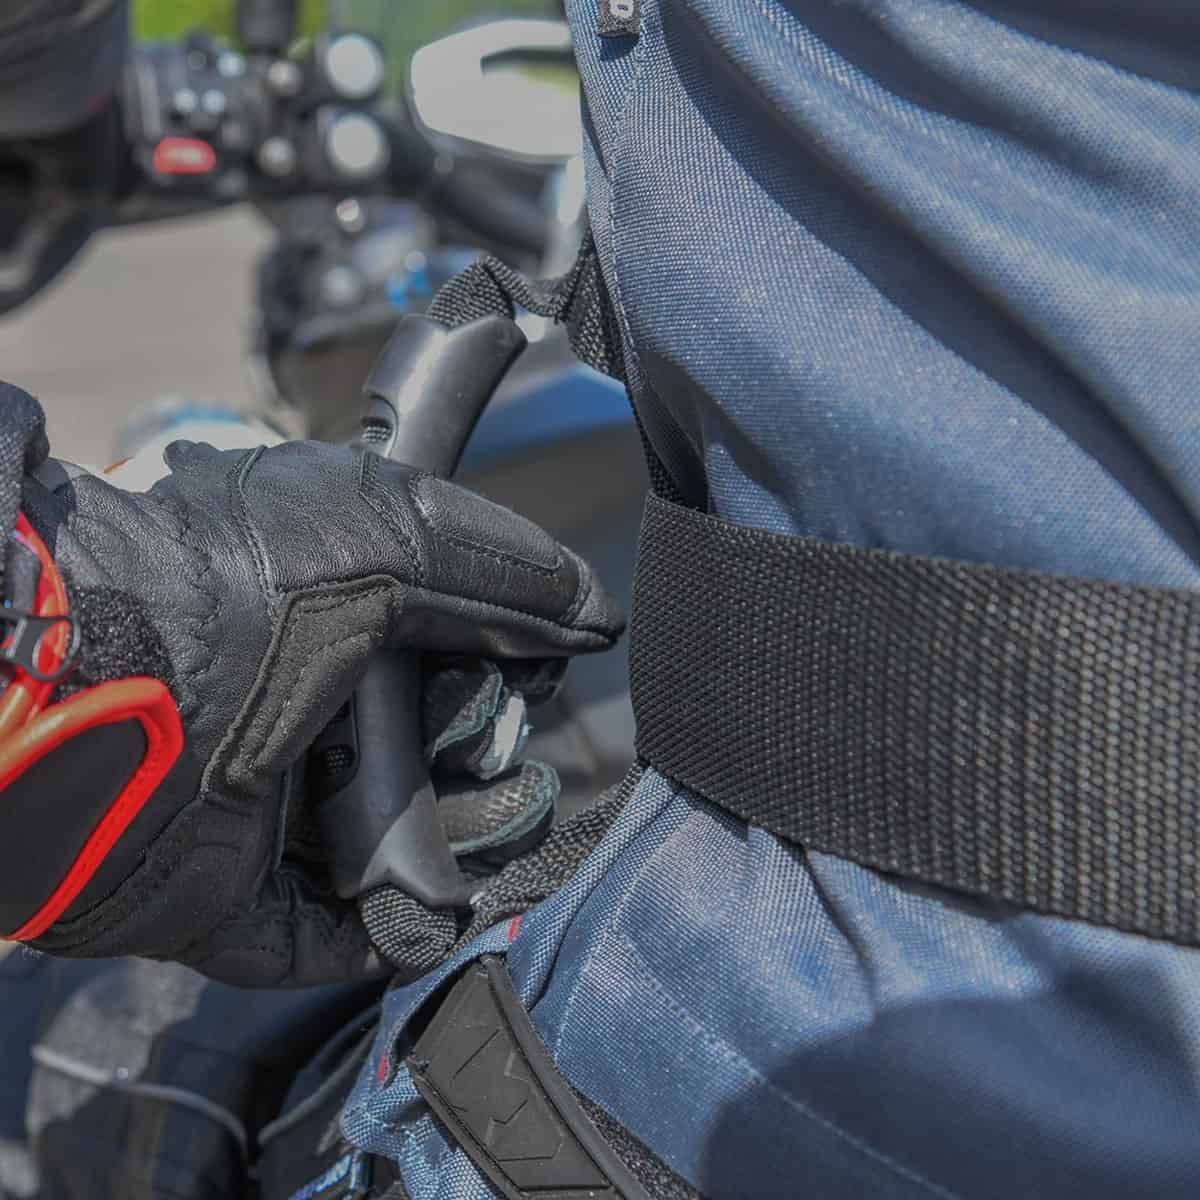 Introducing Oxford Rider Grips Passenger Grab Handles, the perfect solution for comfortable and safe riding as a passenger on a motorcycle!